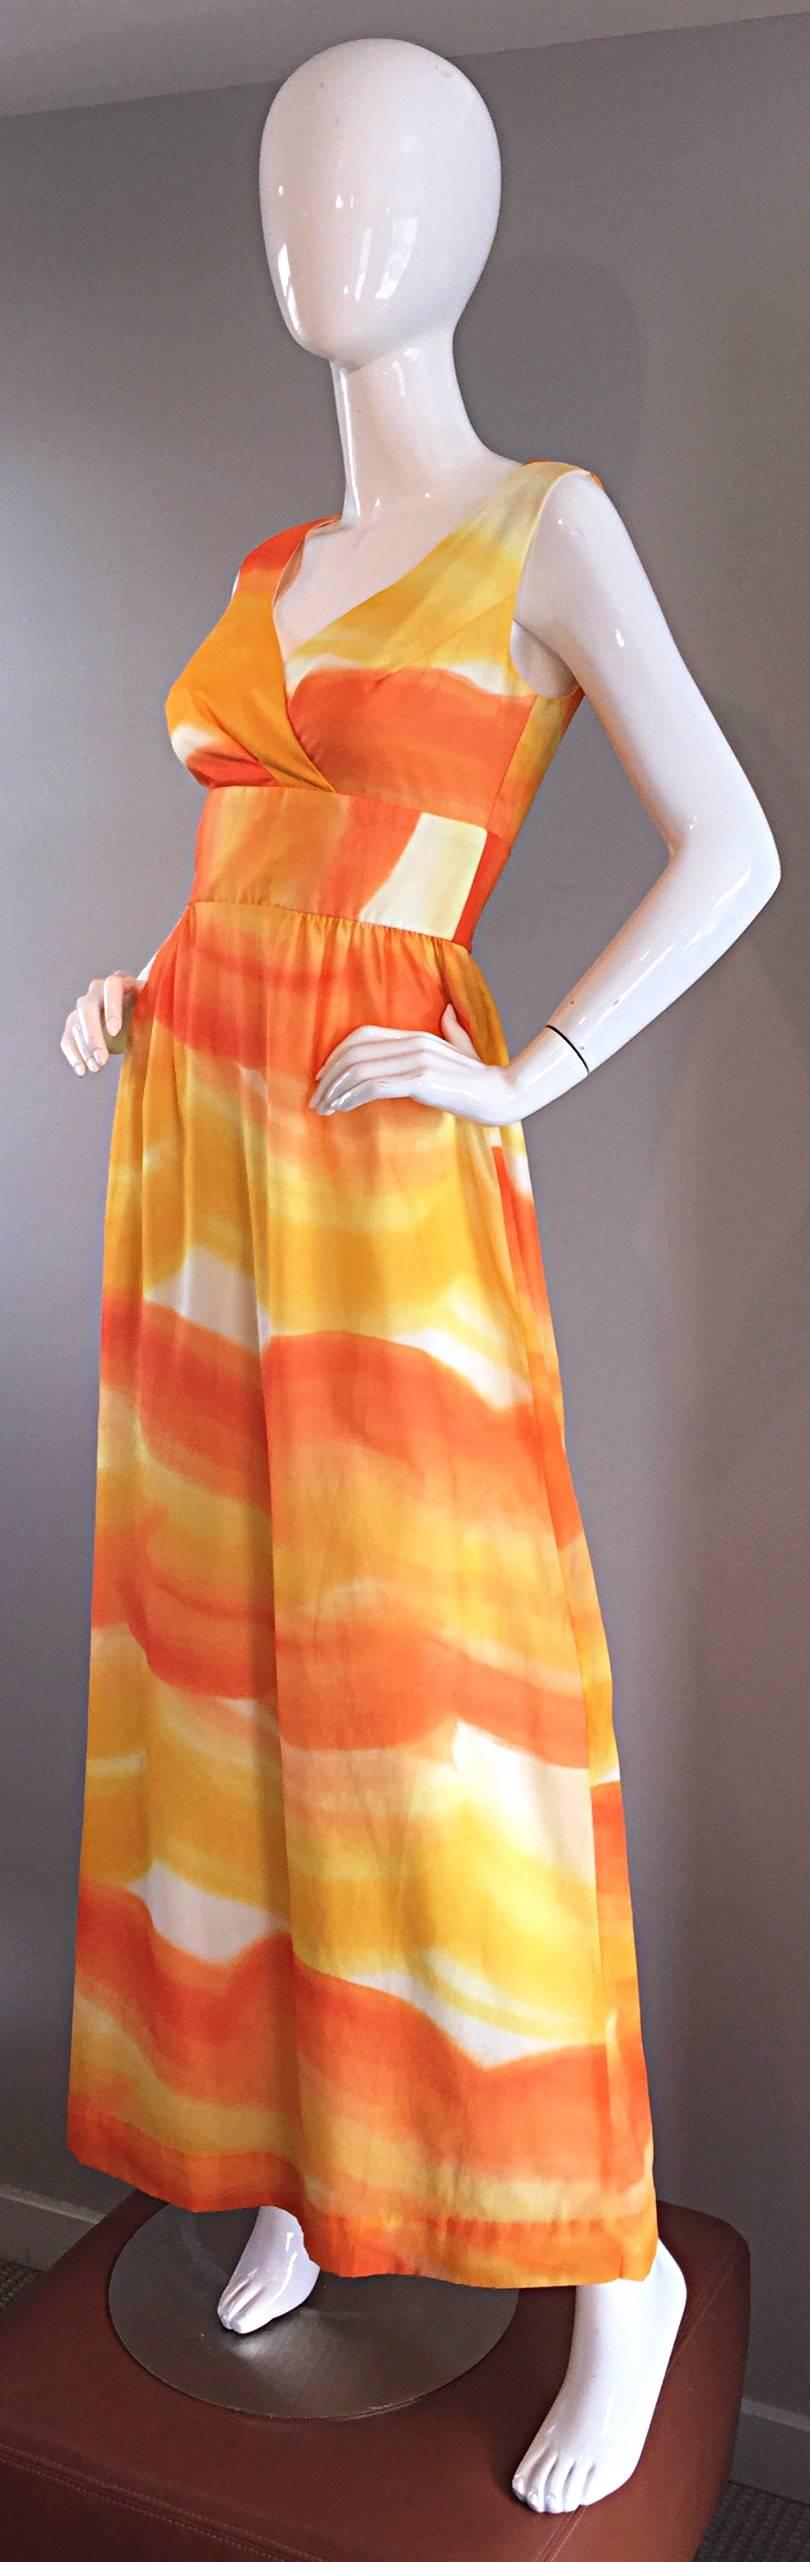 Wonderful 1970s BULLOCKS WILSHIRE silk vintage maxi dress! Vibrant hues of orange, yellow, and white patterned in 'watercolor' like swirls throughout. Flattering cut, with an incredible print! Fully lined in what feels like a lightweight cotton.